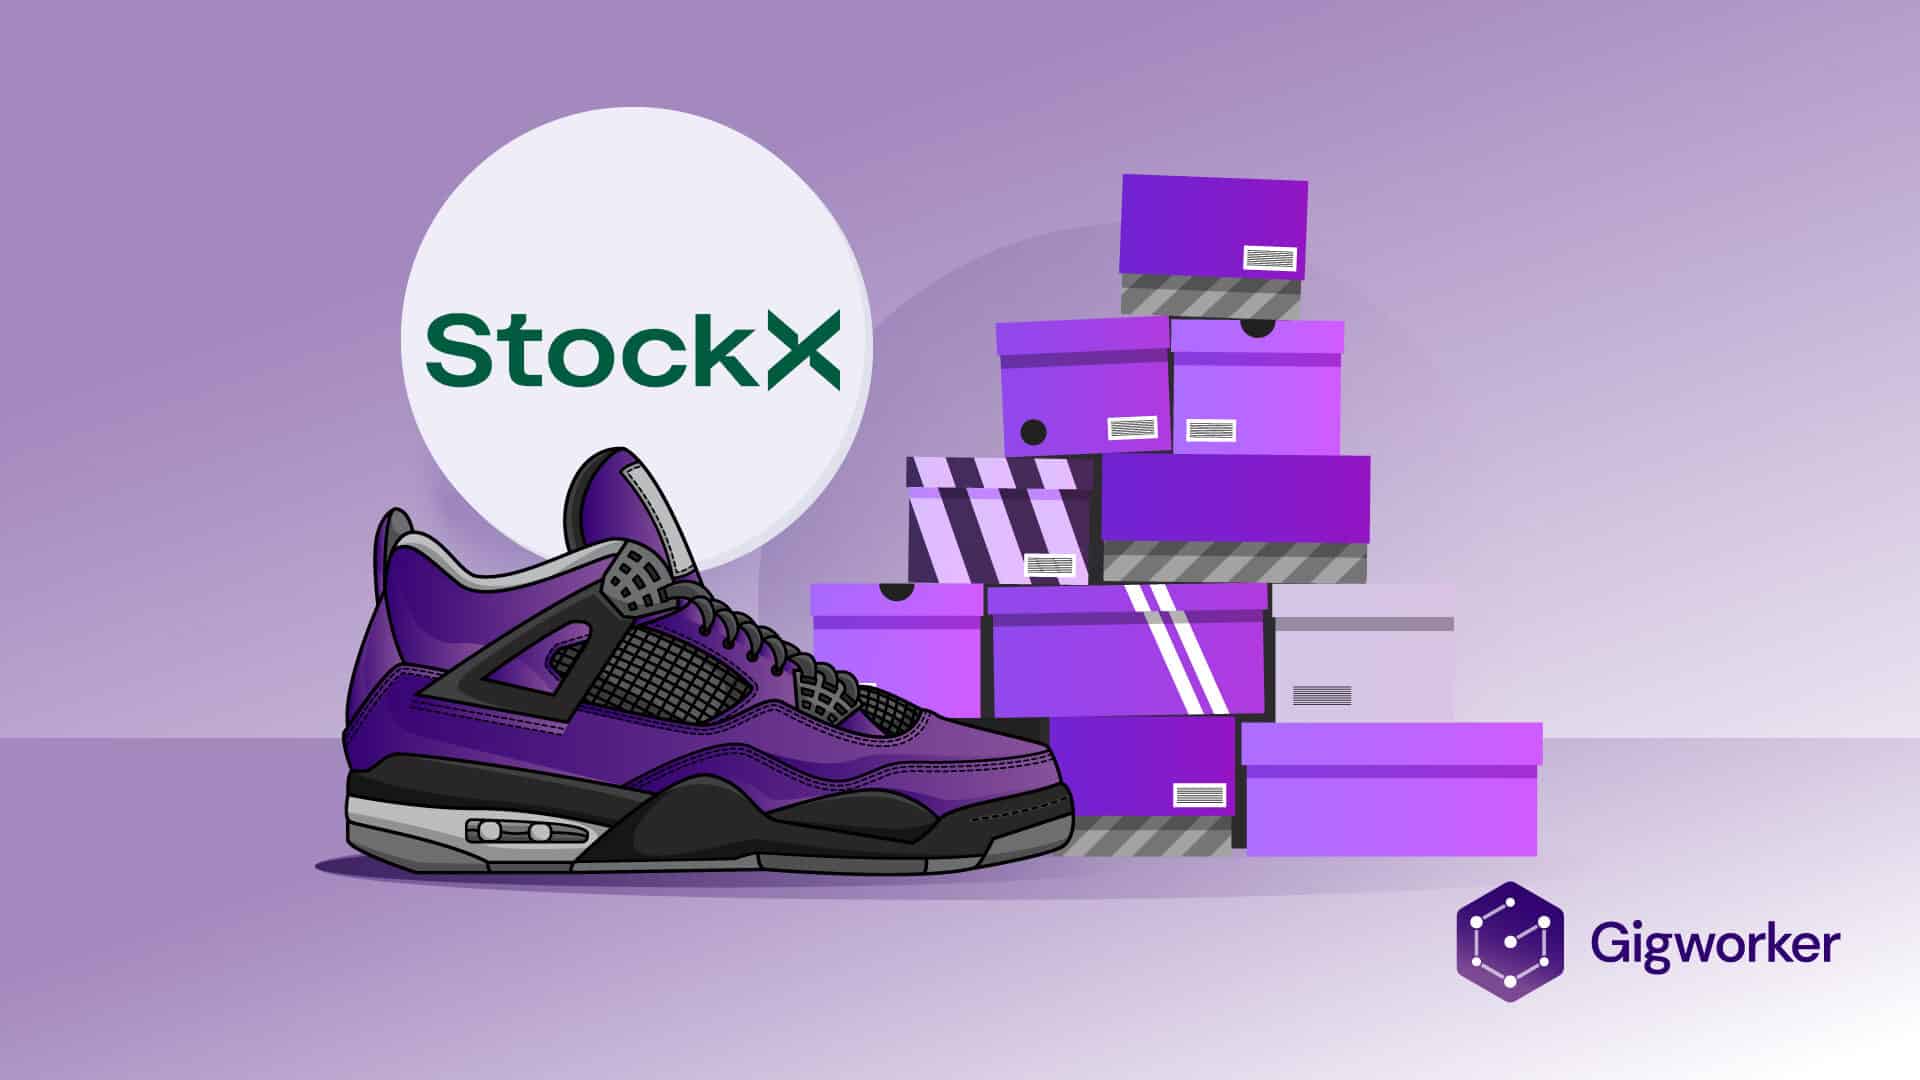 vector graphic showing an illustration of shoes being sold on stockx